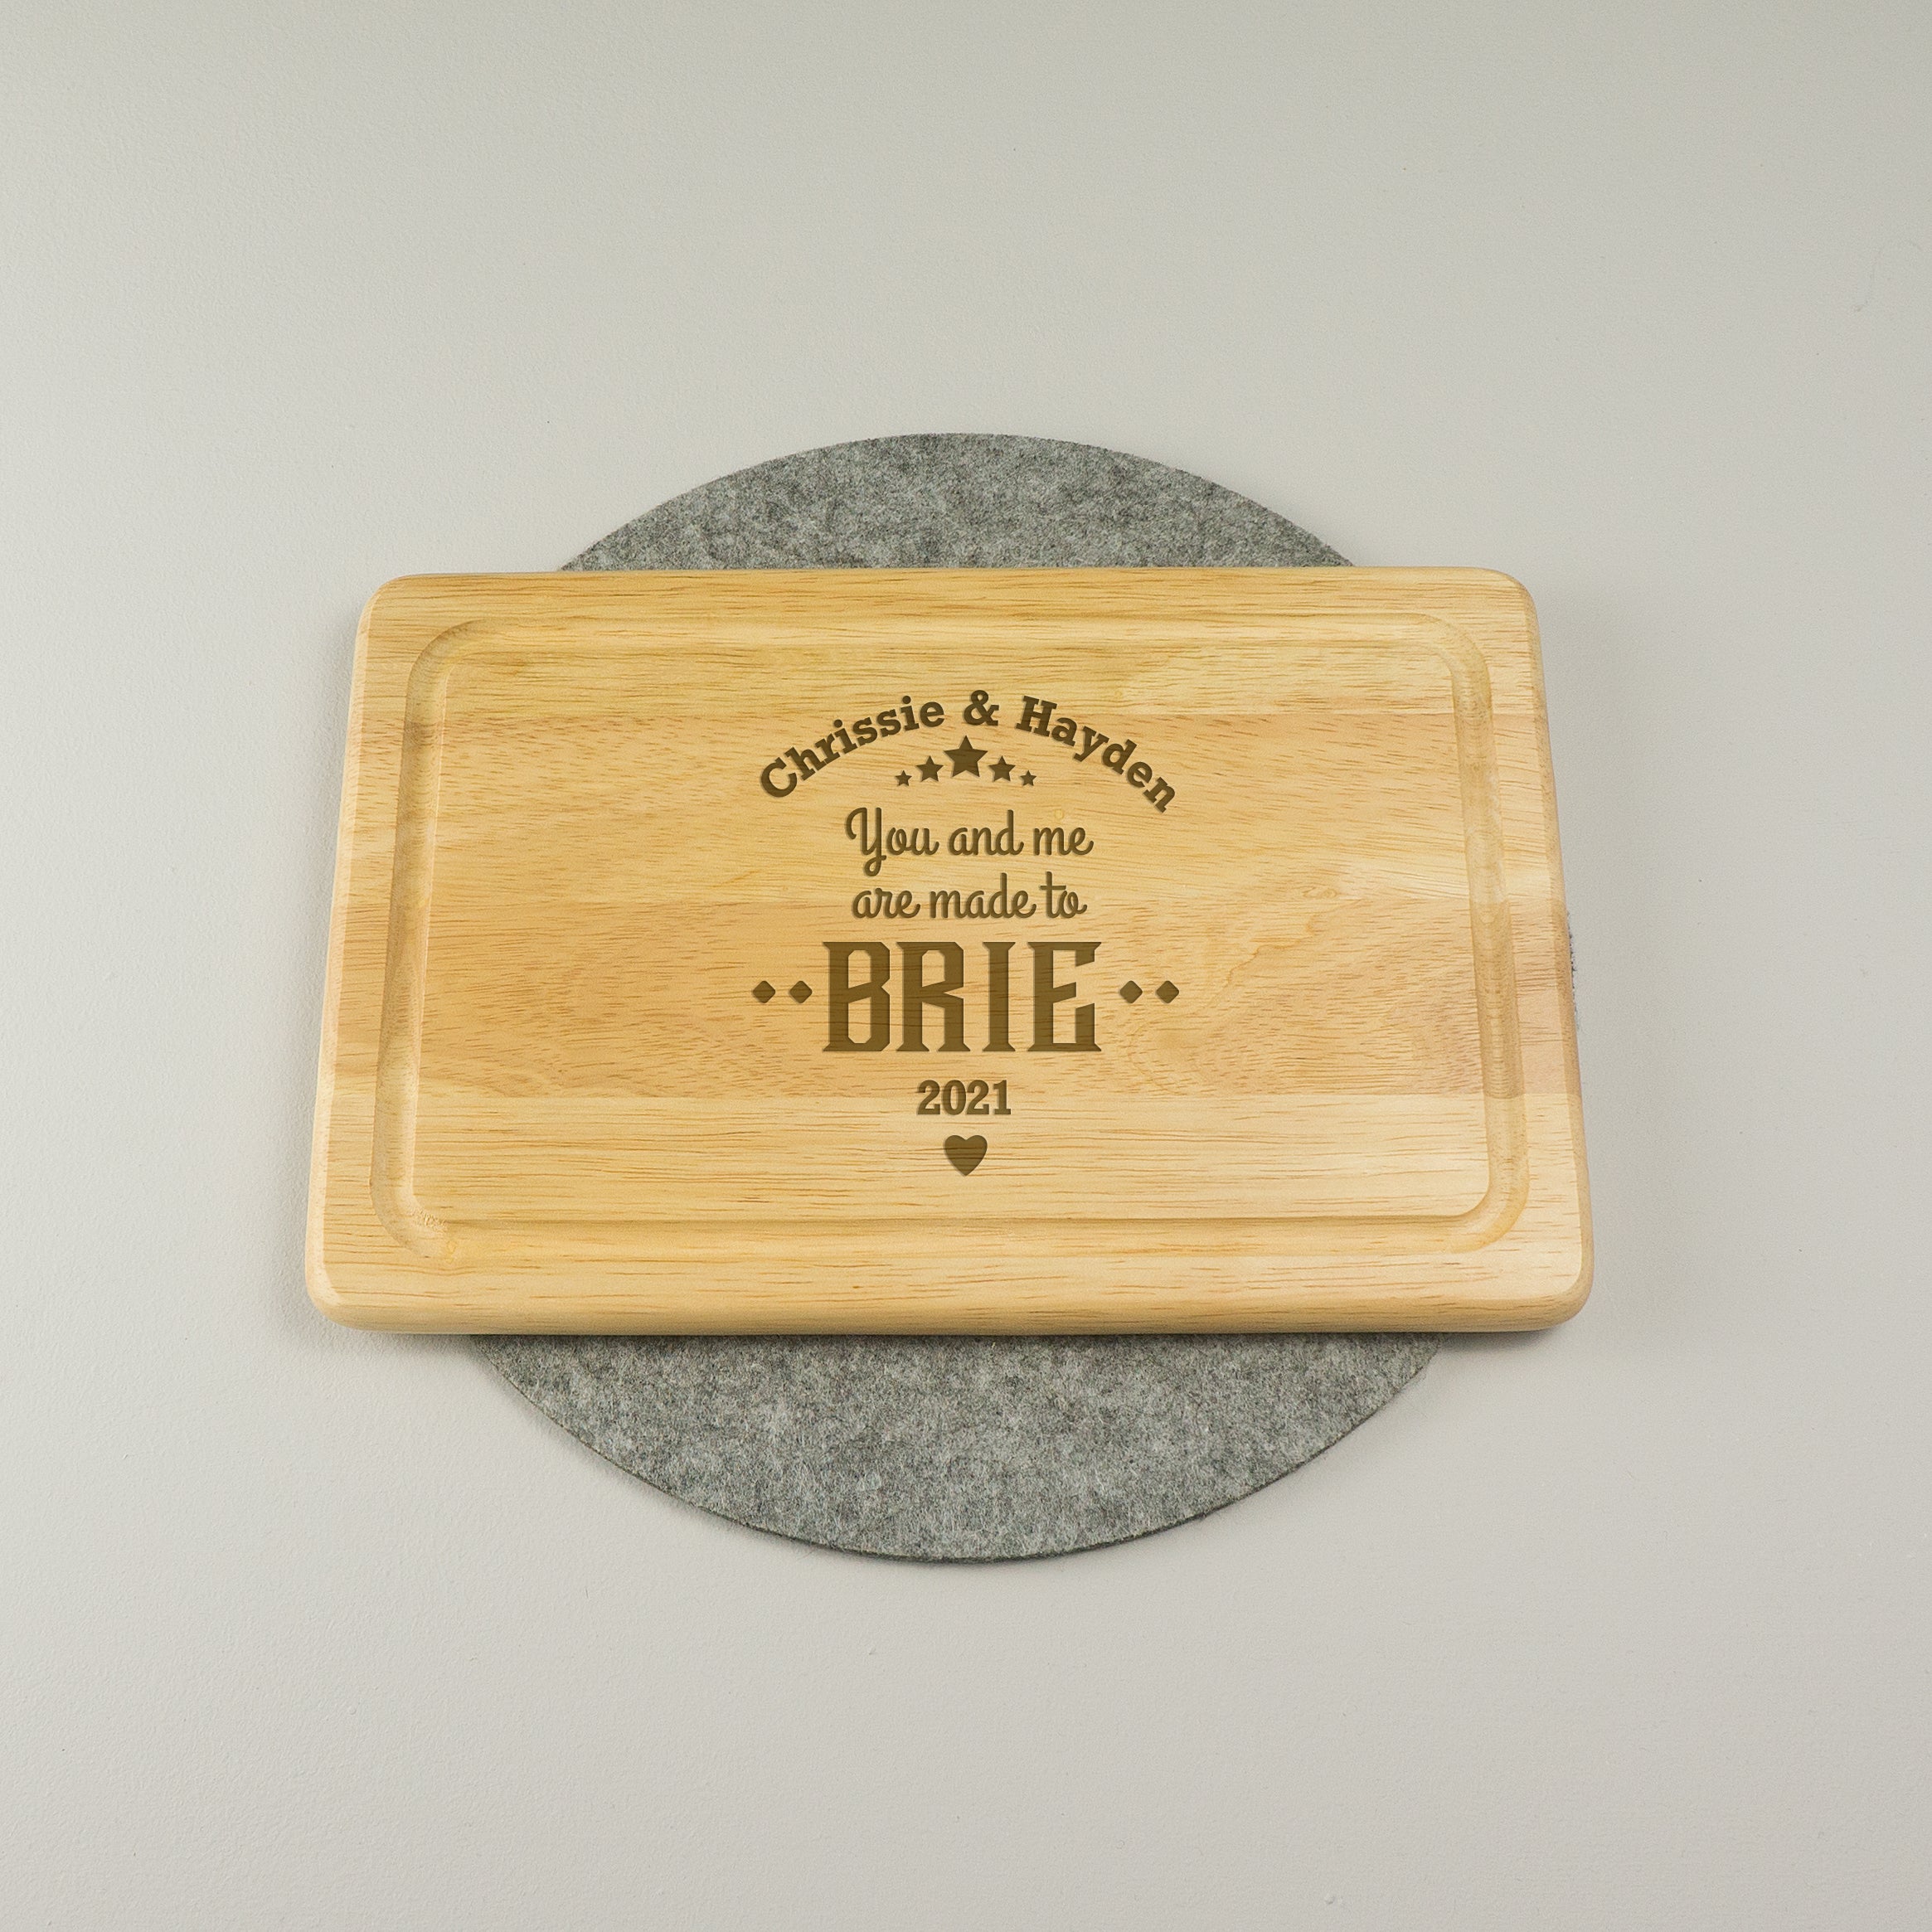 Personalised cheese serving board for couples